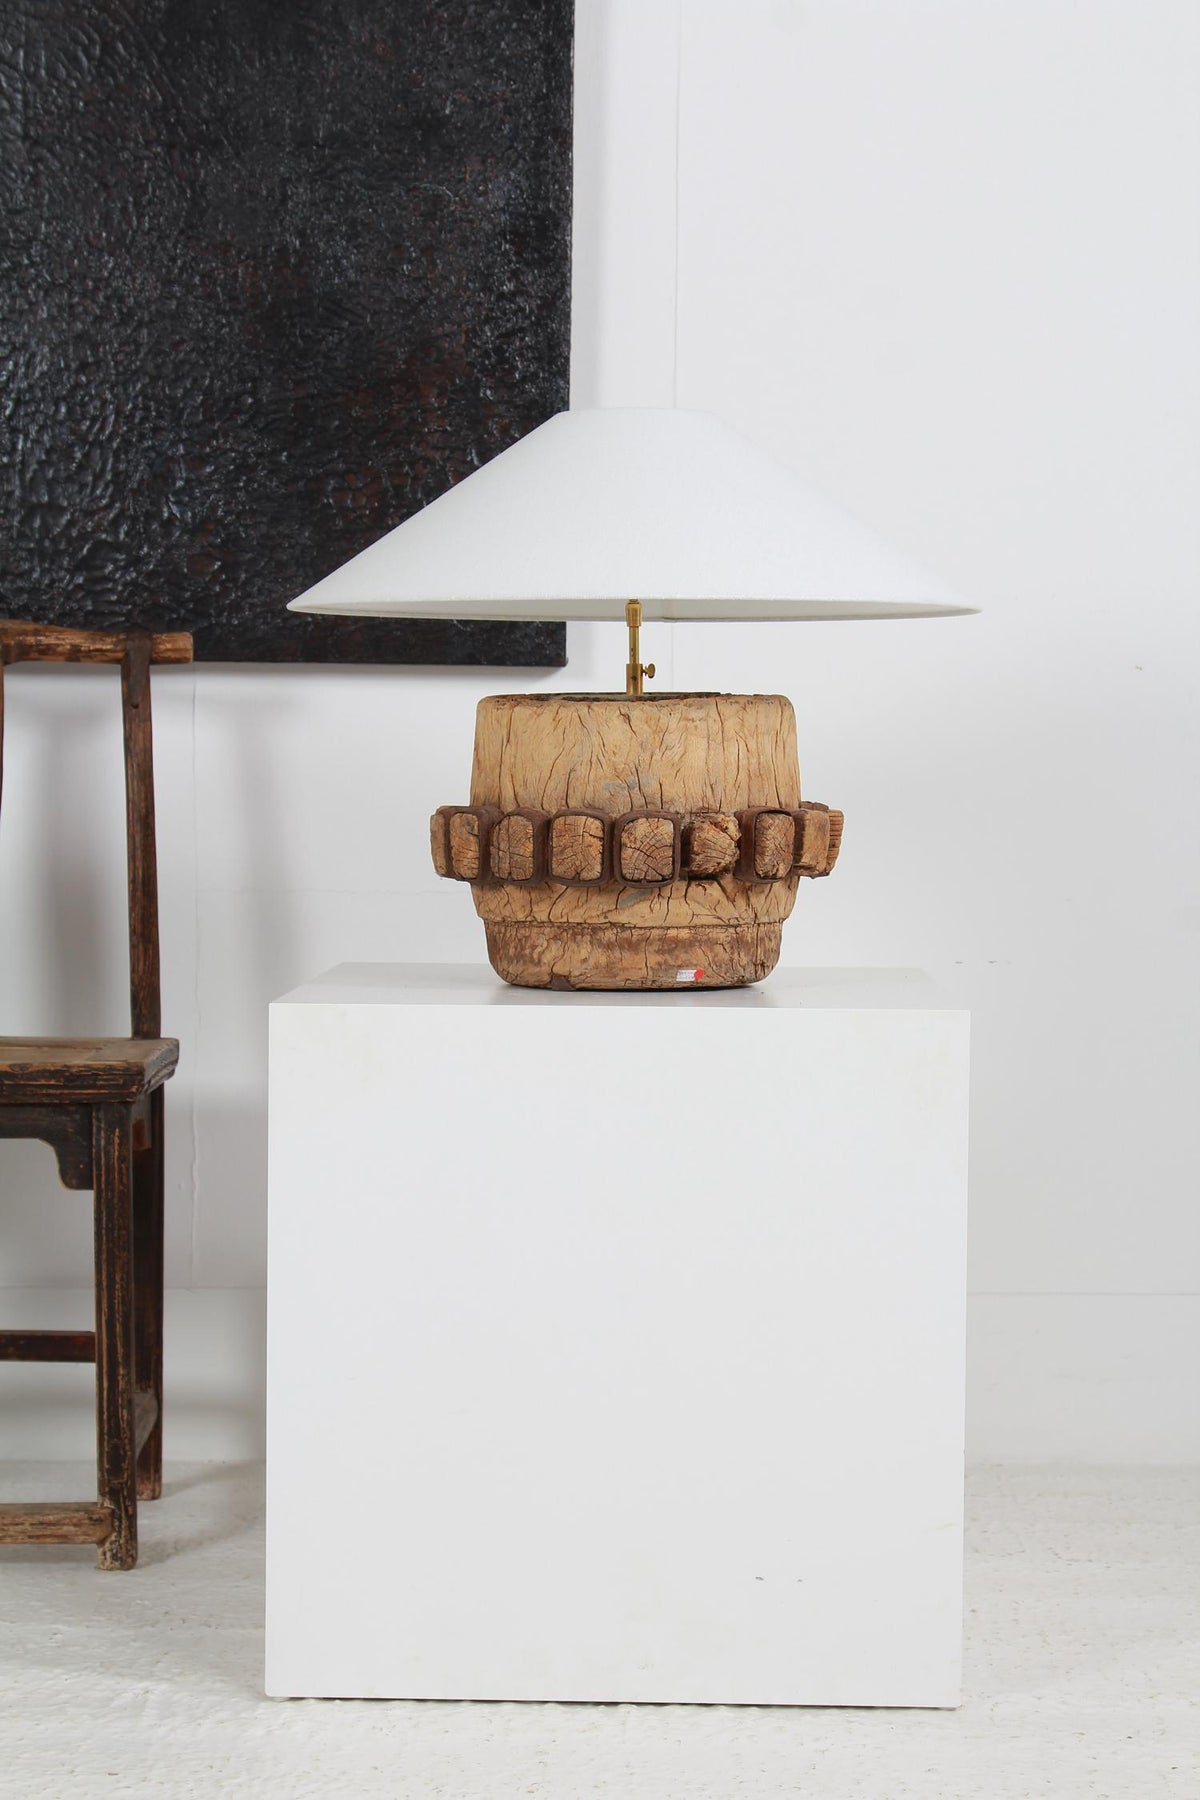 Magnificent Lamp Fashioned from an Antique Architectural Wooden Fragment